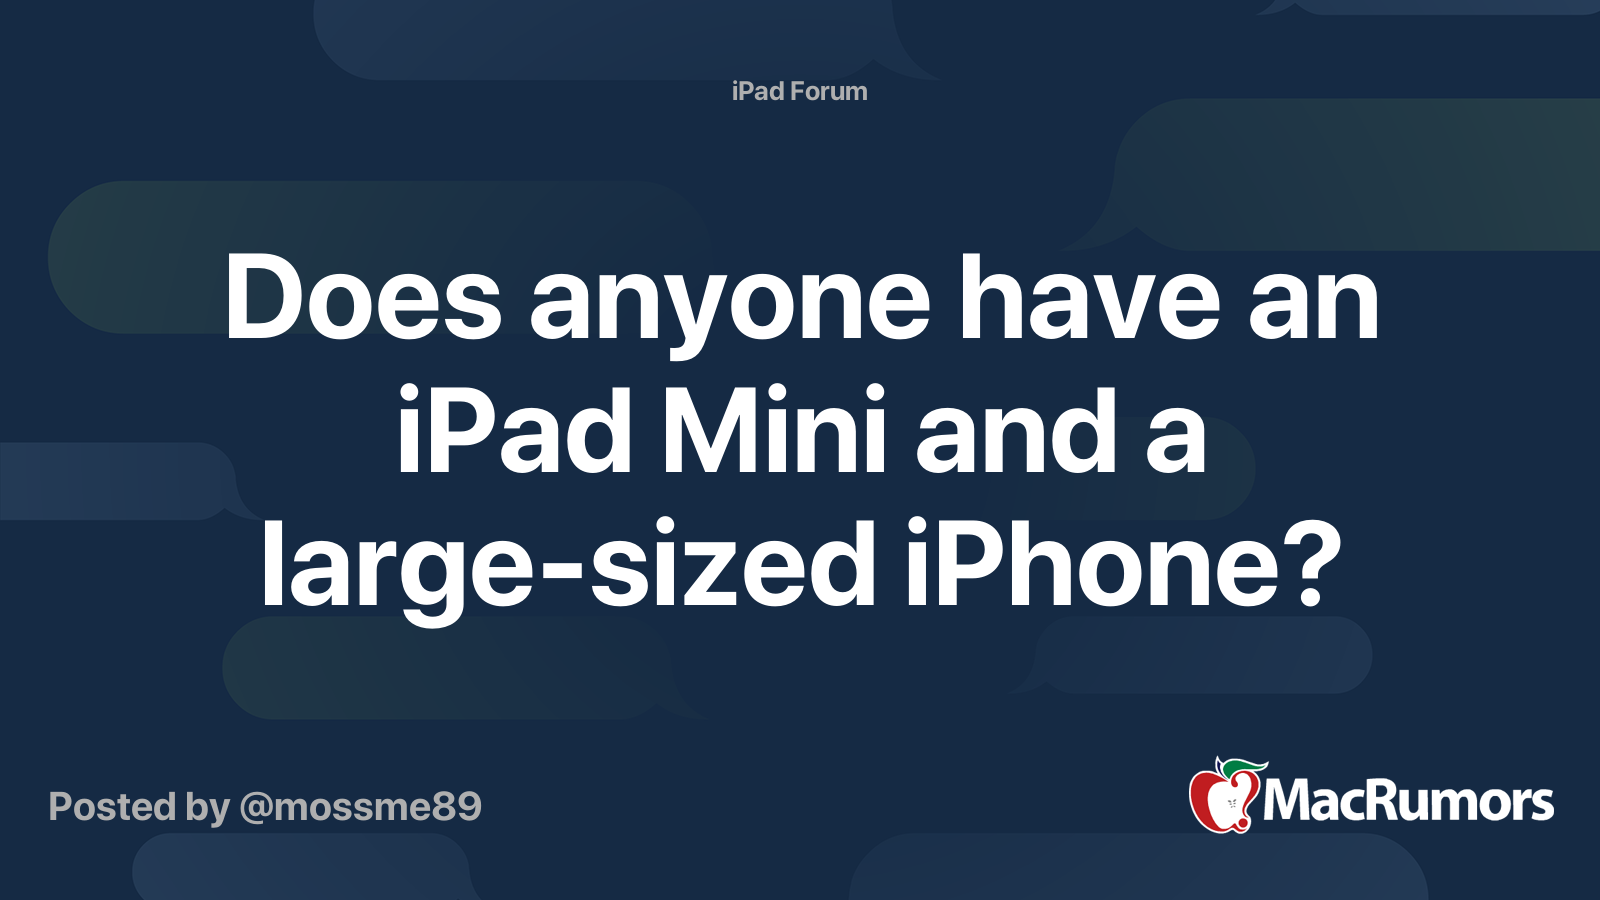 Does anyone have an iPad Mini and a large-sized iPhone